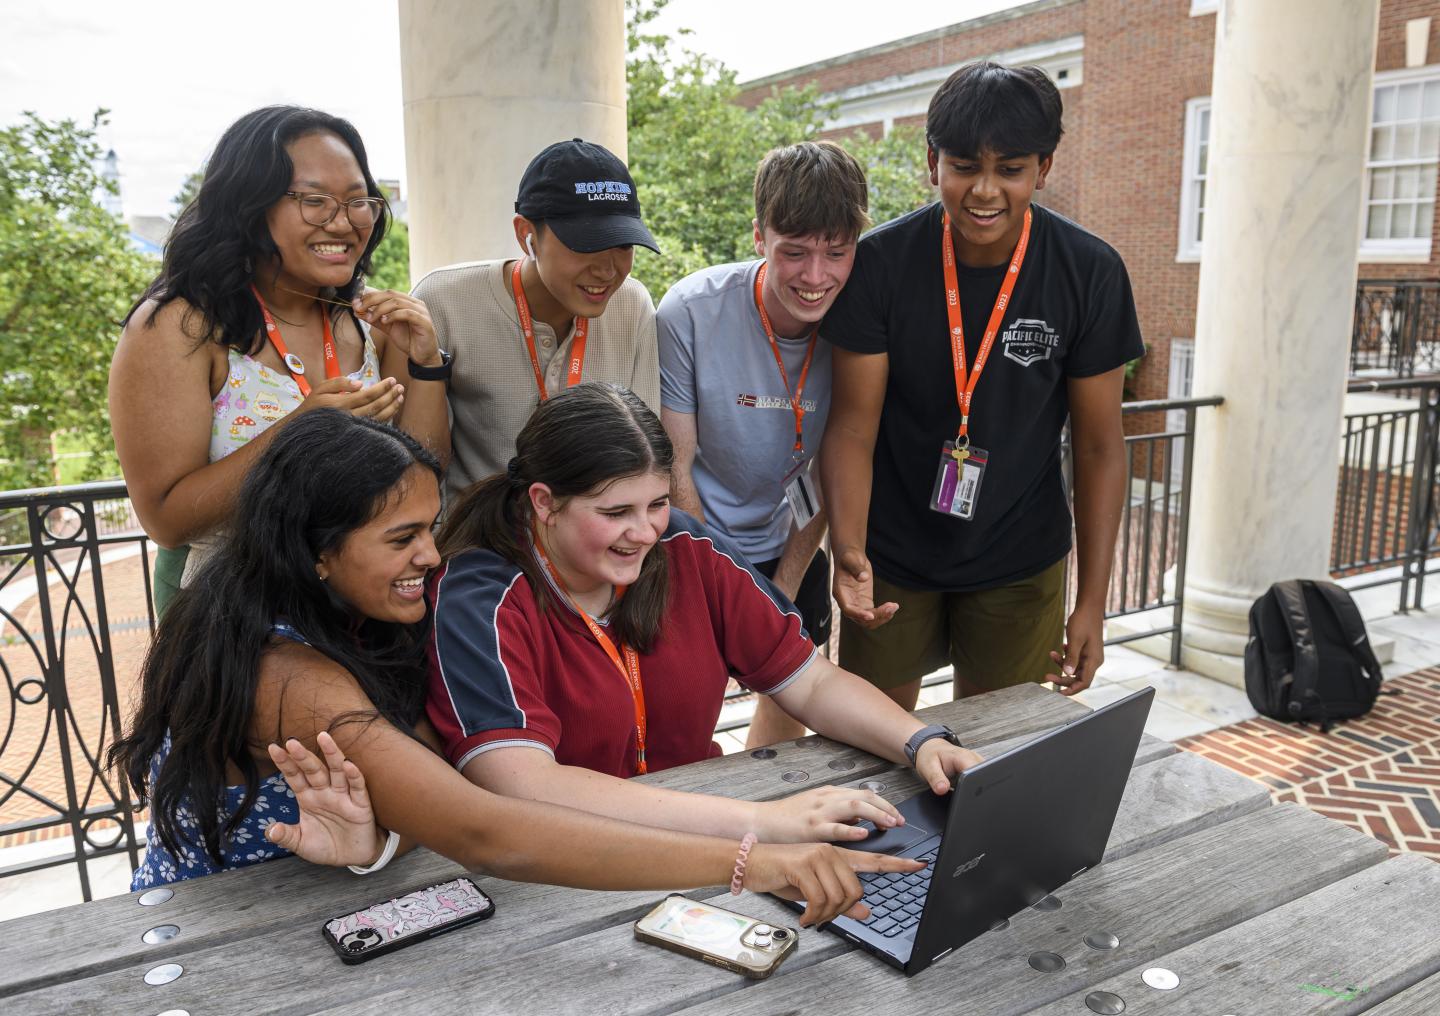 Six students smile as they look at a laptop screen.